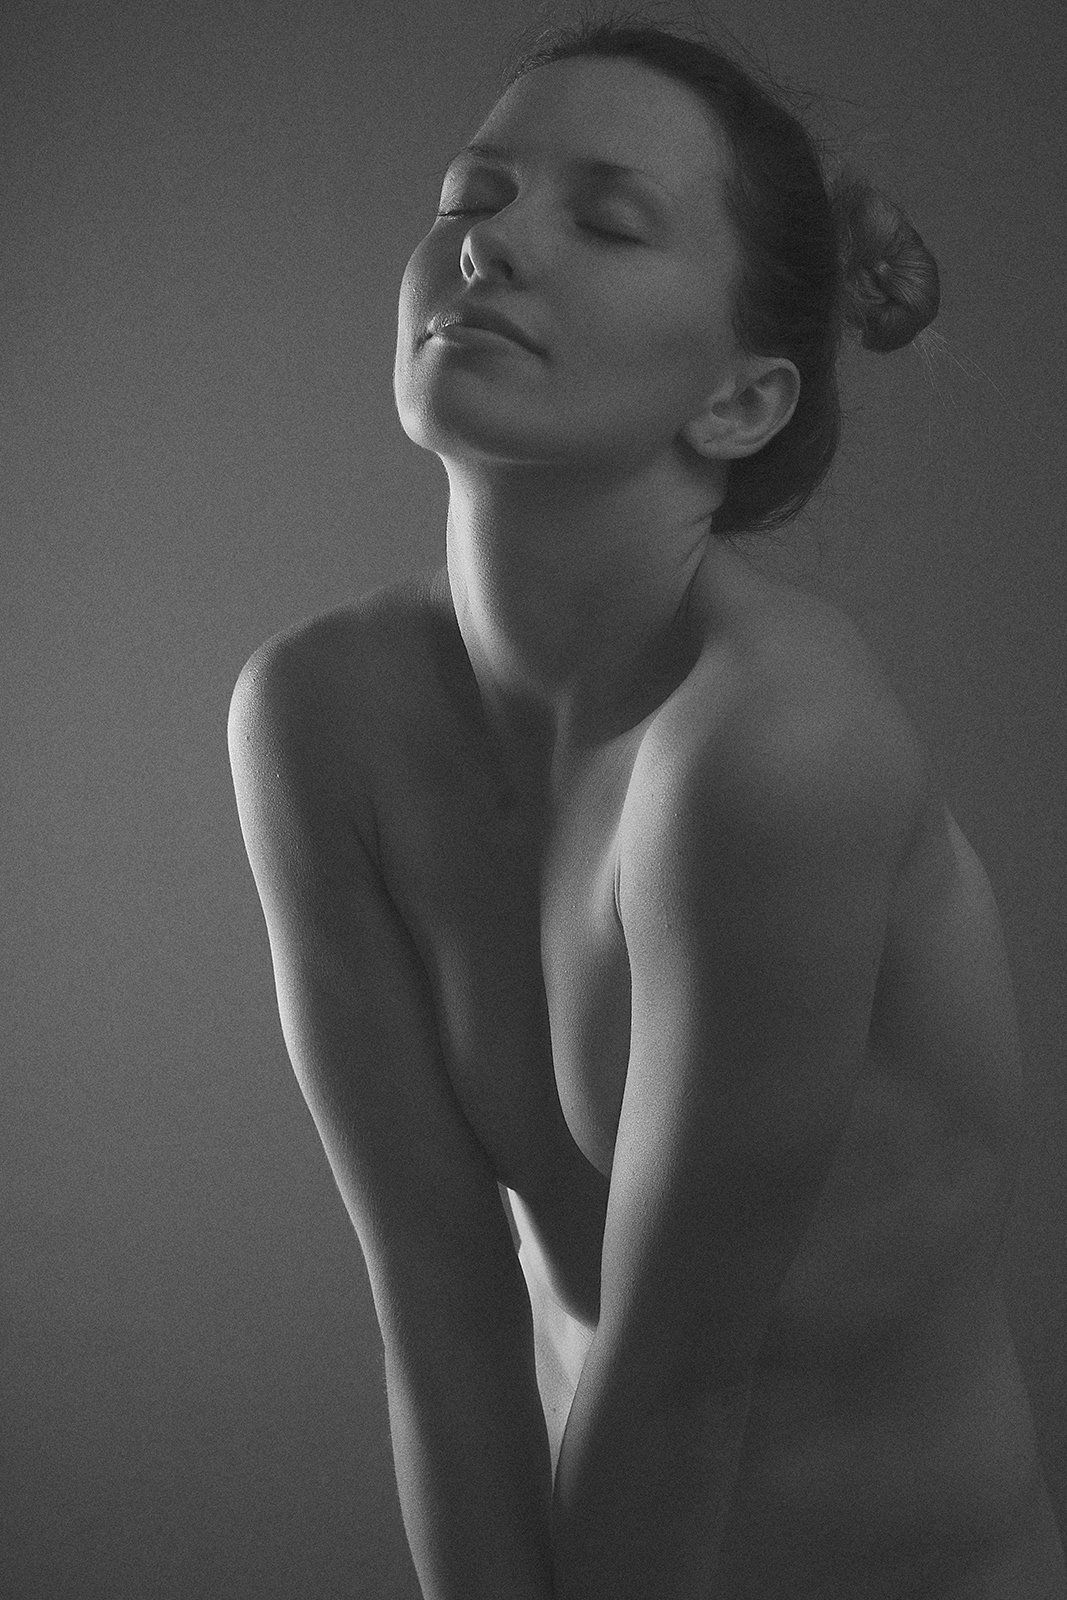 nude, female, fine, art, portrait, photo, desire, motion, expression, nudes, naked, drama, dramatic, naked, woman, young, adult, face, body, beauty, Дмитрий Толоконов